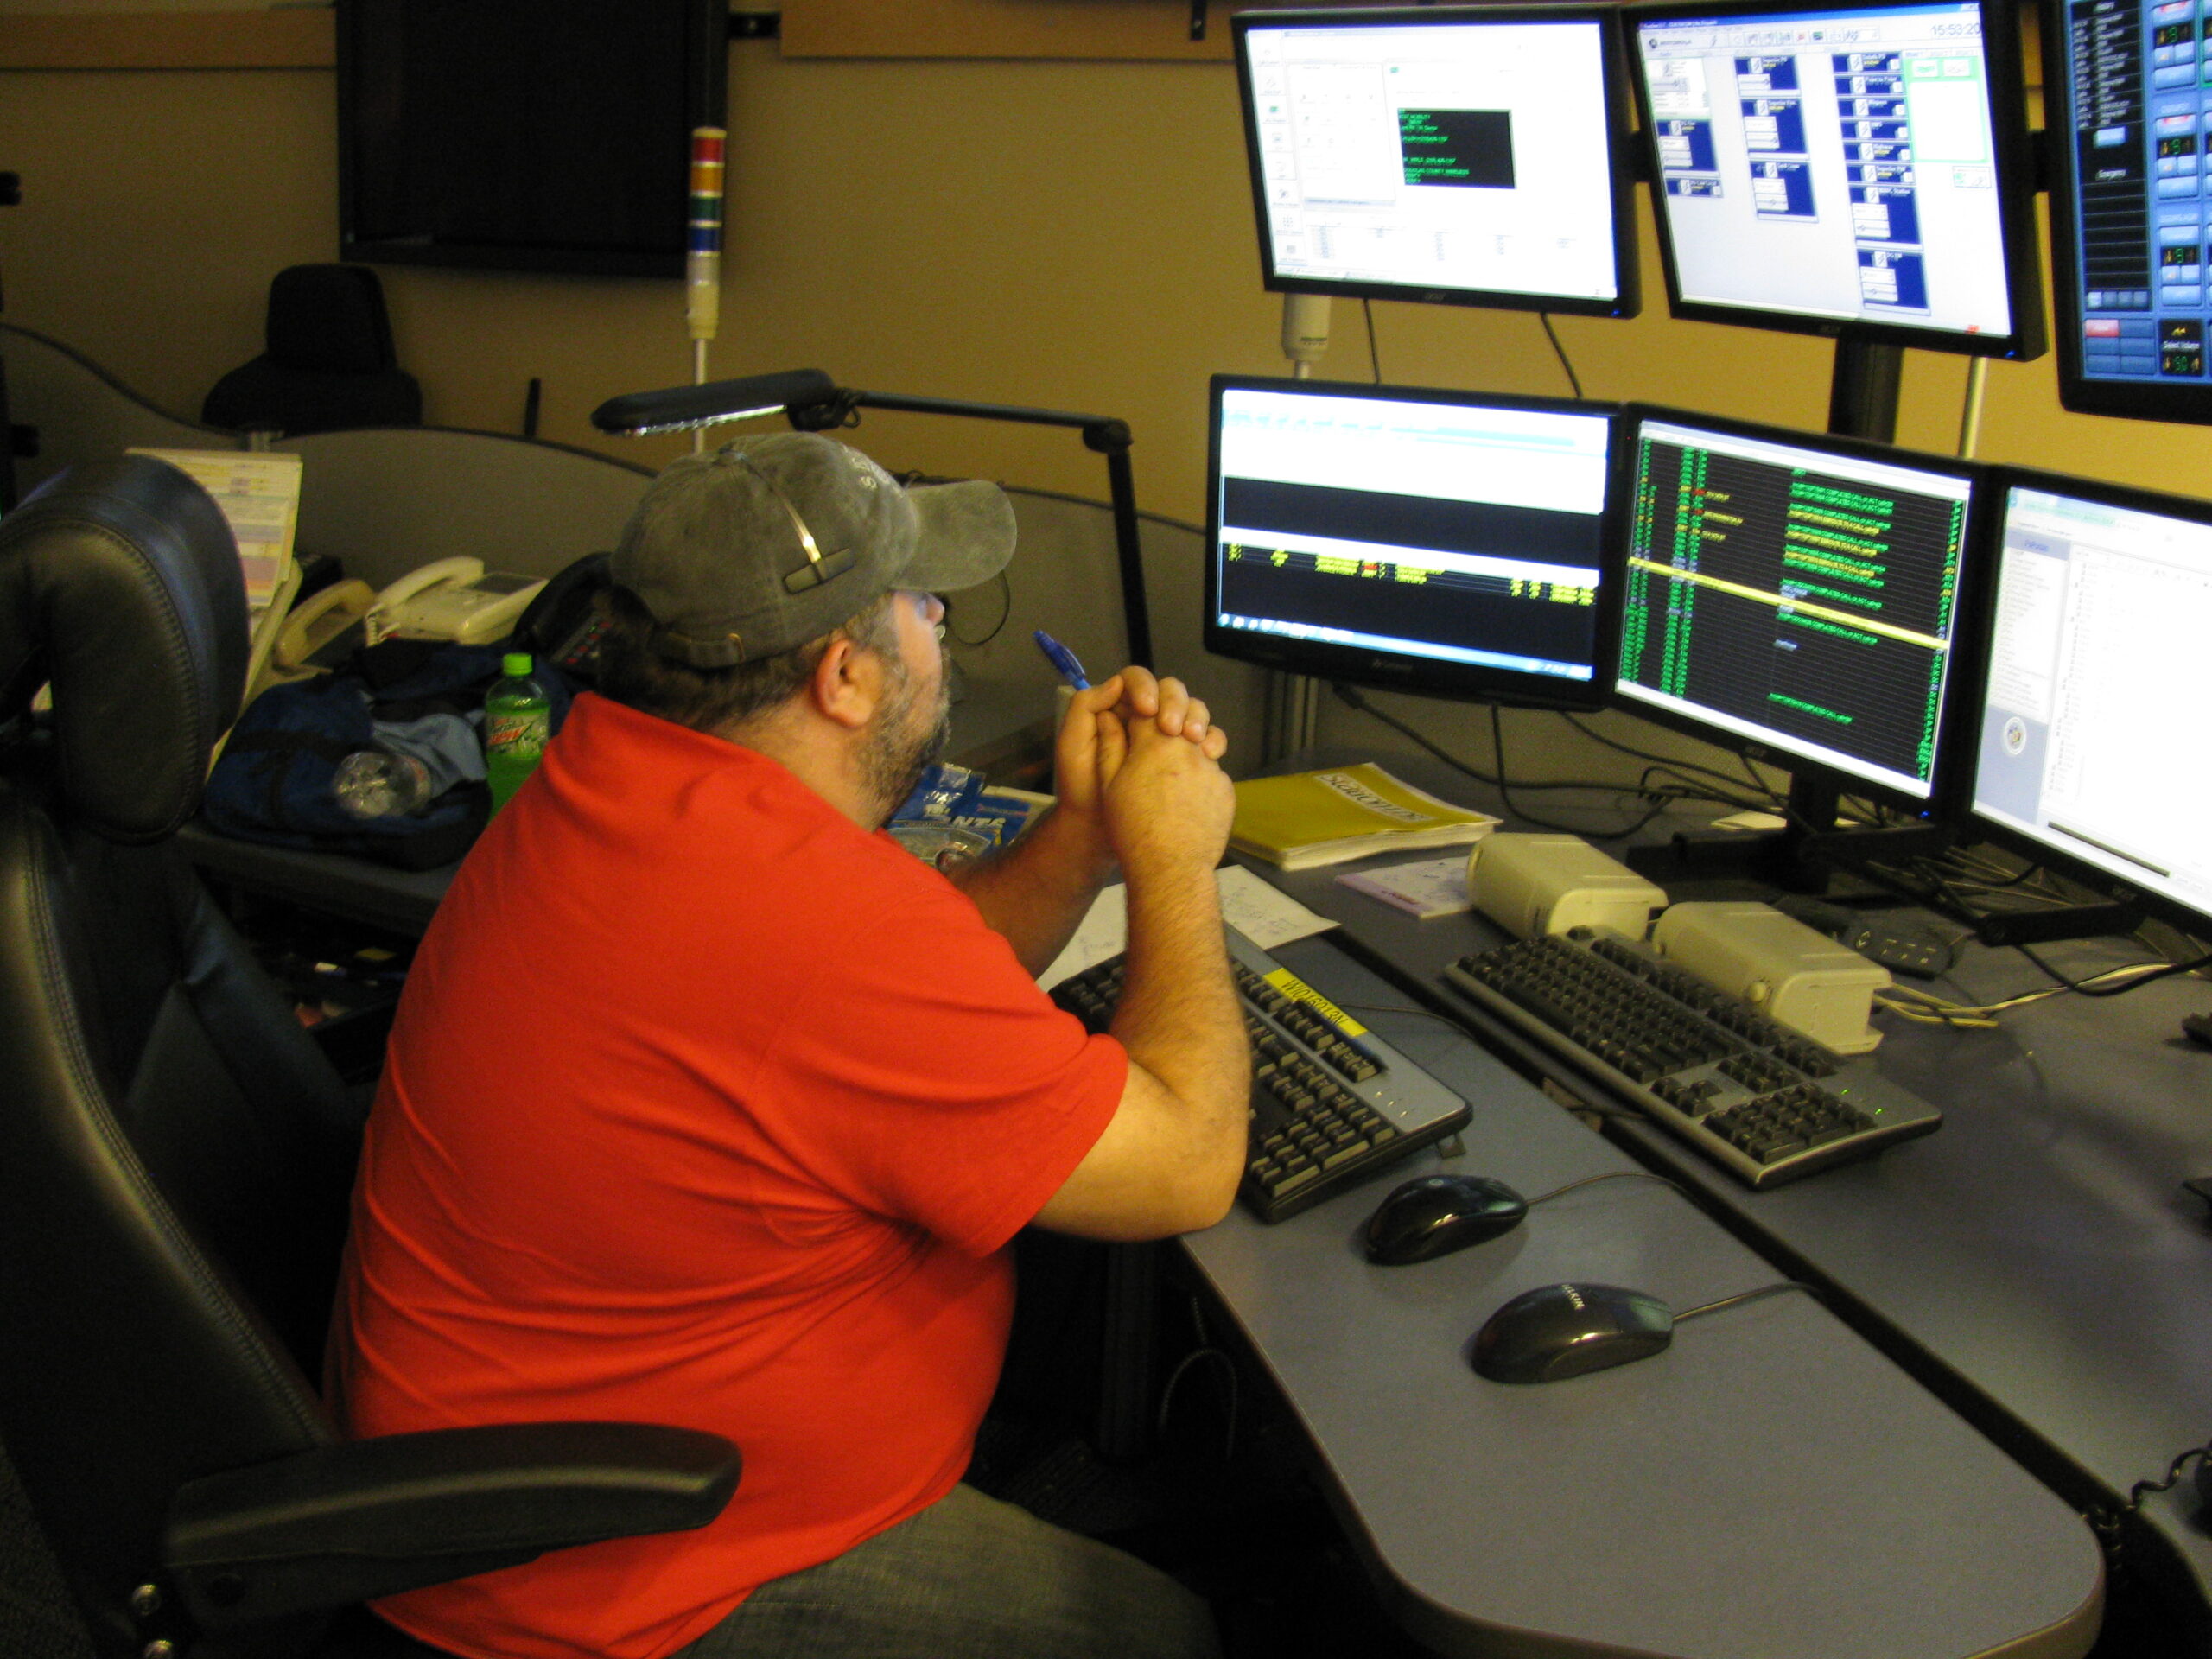 Staffing concerns prompt northern Wisconsin counties to explore merging 911 dispatch centers